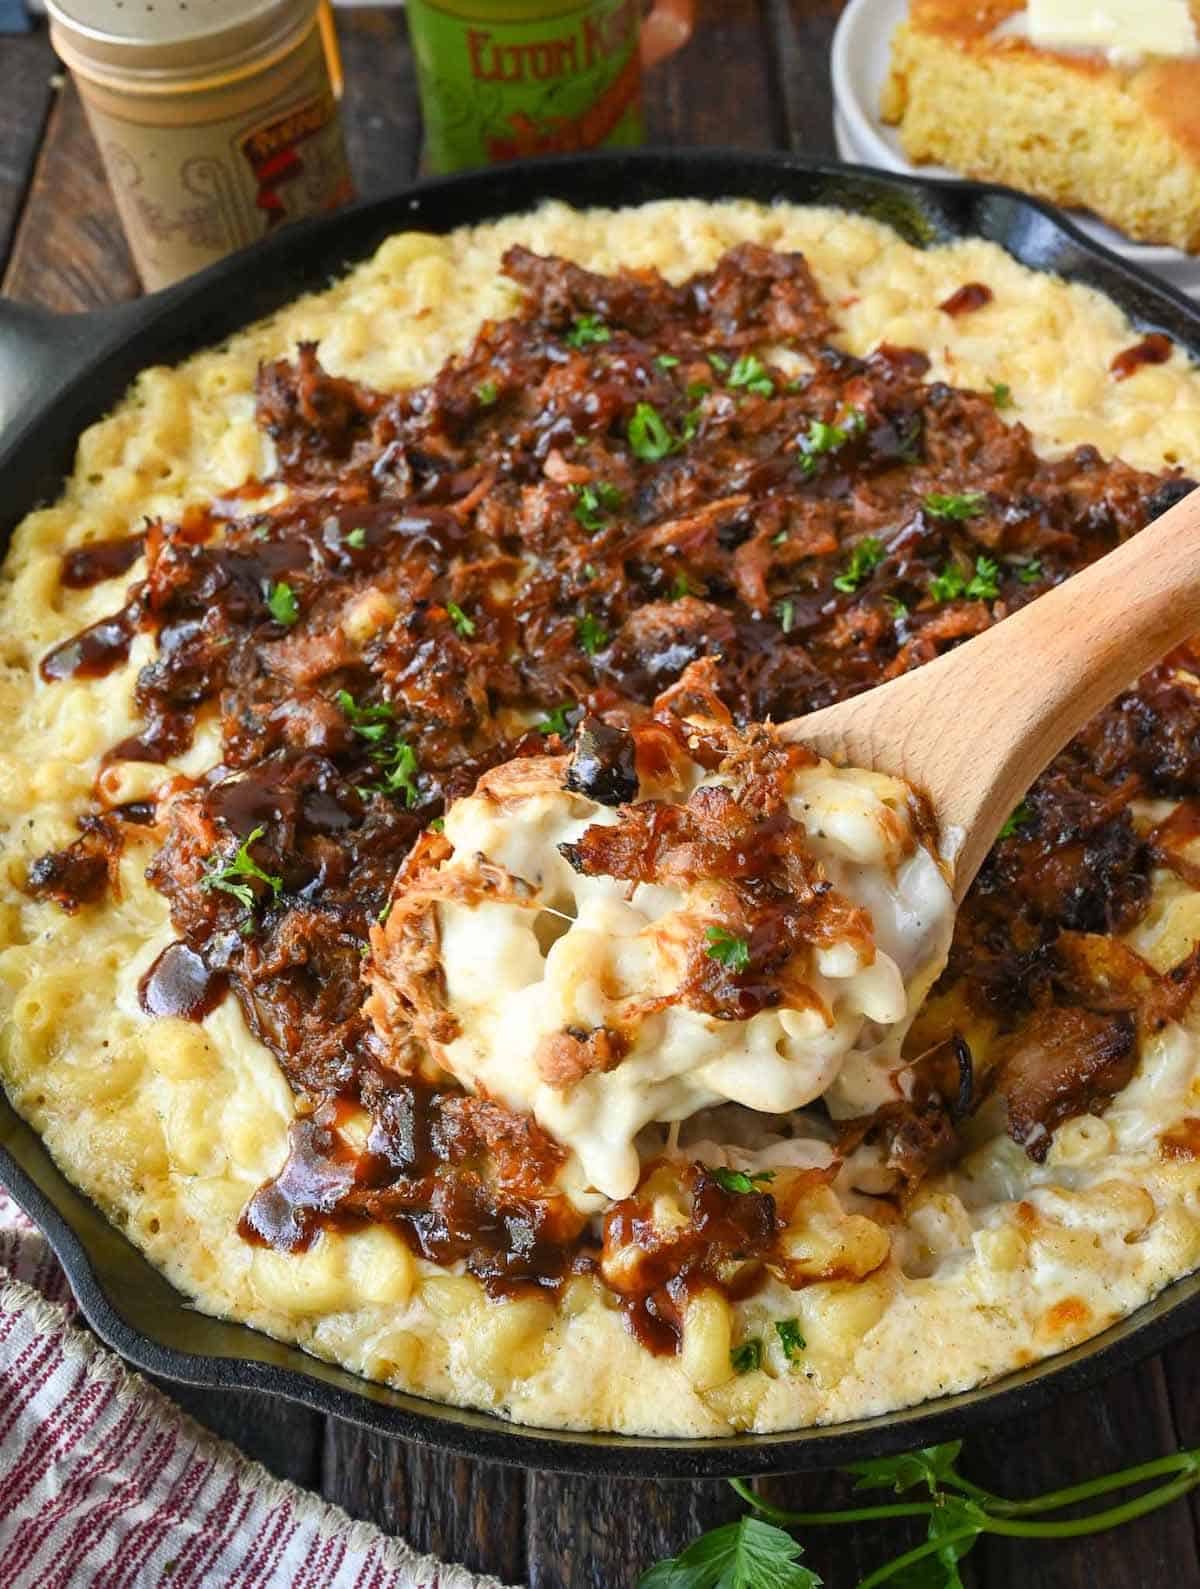 Pulled pork mac and cheese in a cast iron skillet with a wooden spoon scooping some out.